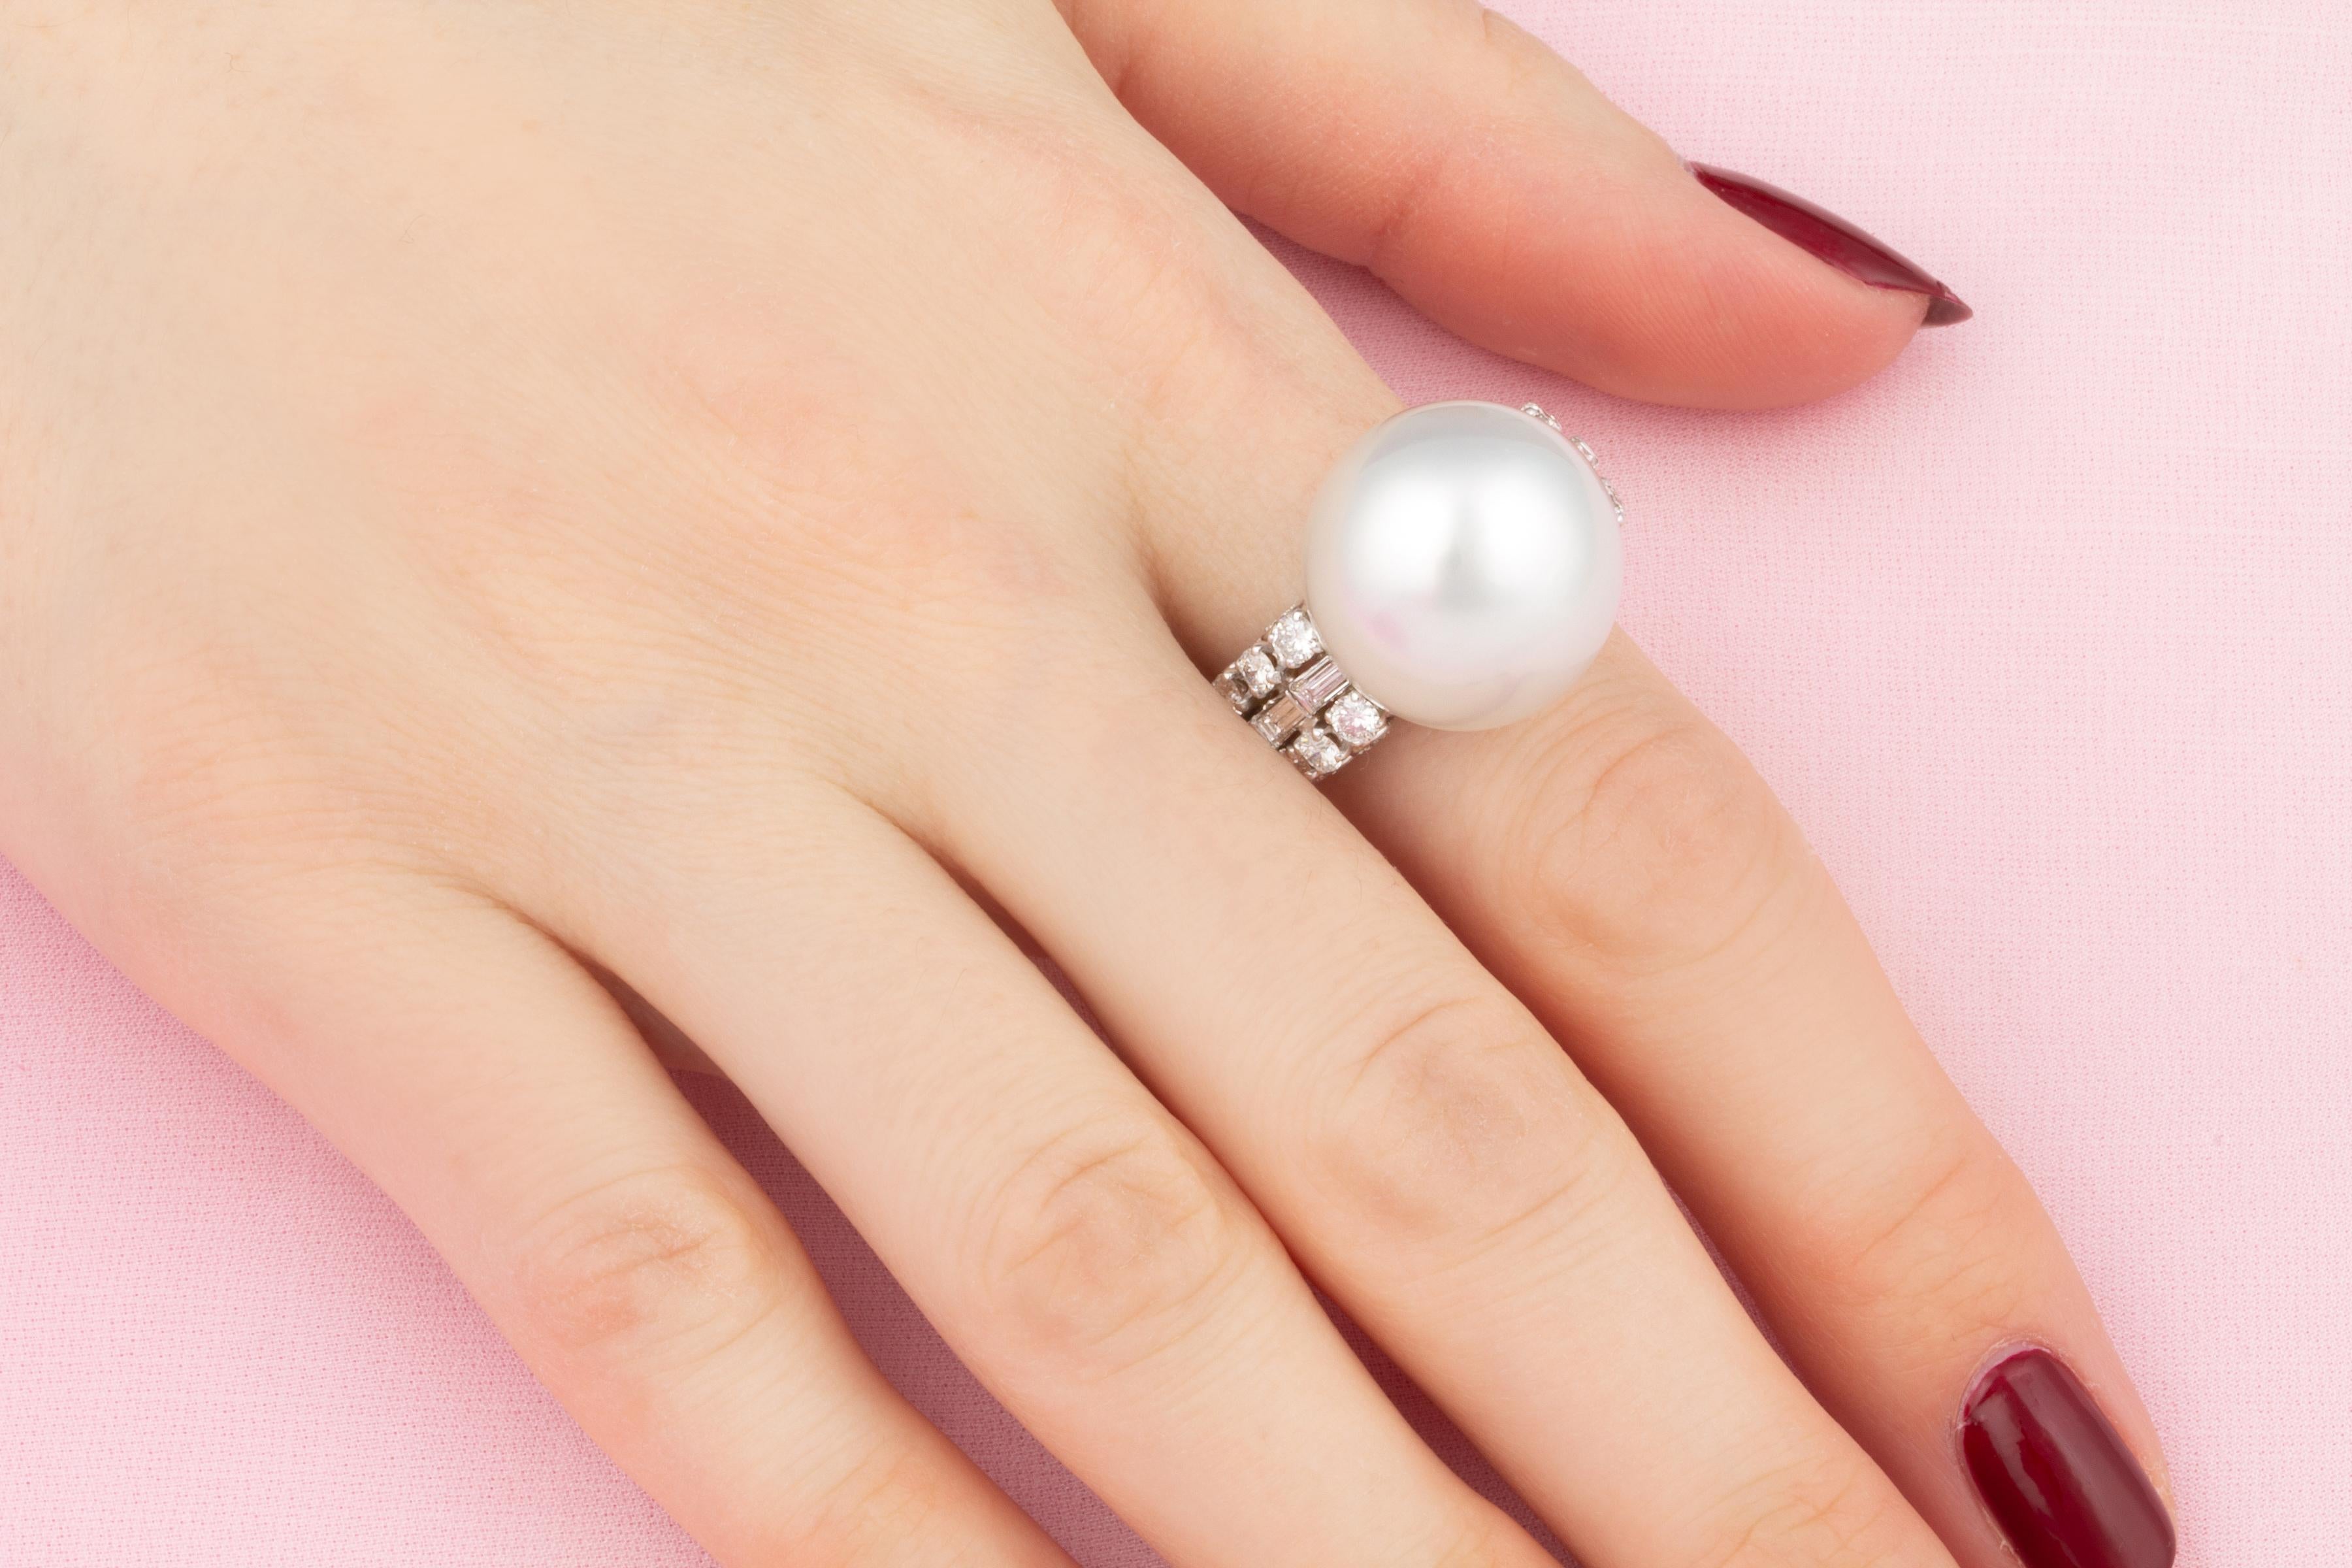 This ring features a South Sea pearl of 16.50mm diameter. The pearl is untreated. It displays a splendid nacre and its natural color and luster have not been enhanced in any way. The pearl is perched atop a symmetrical openwork design with 0.60